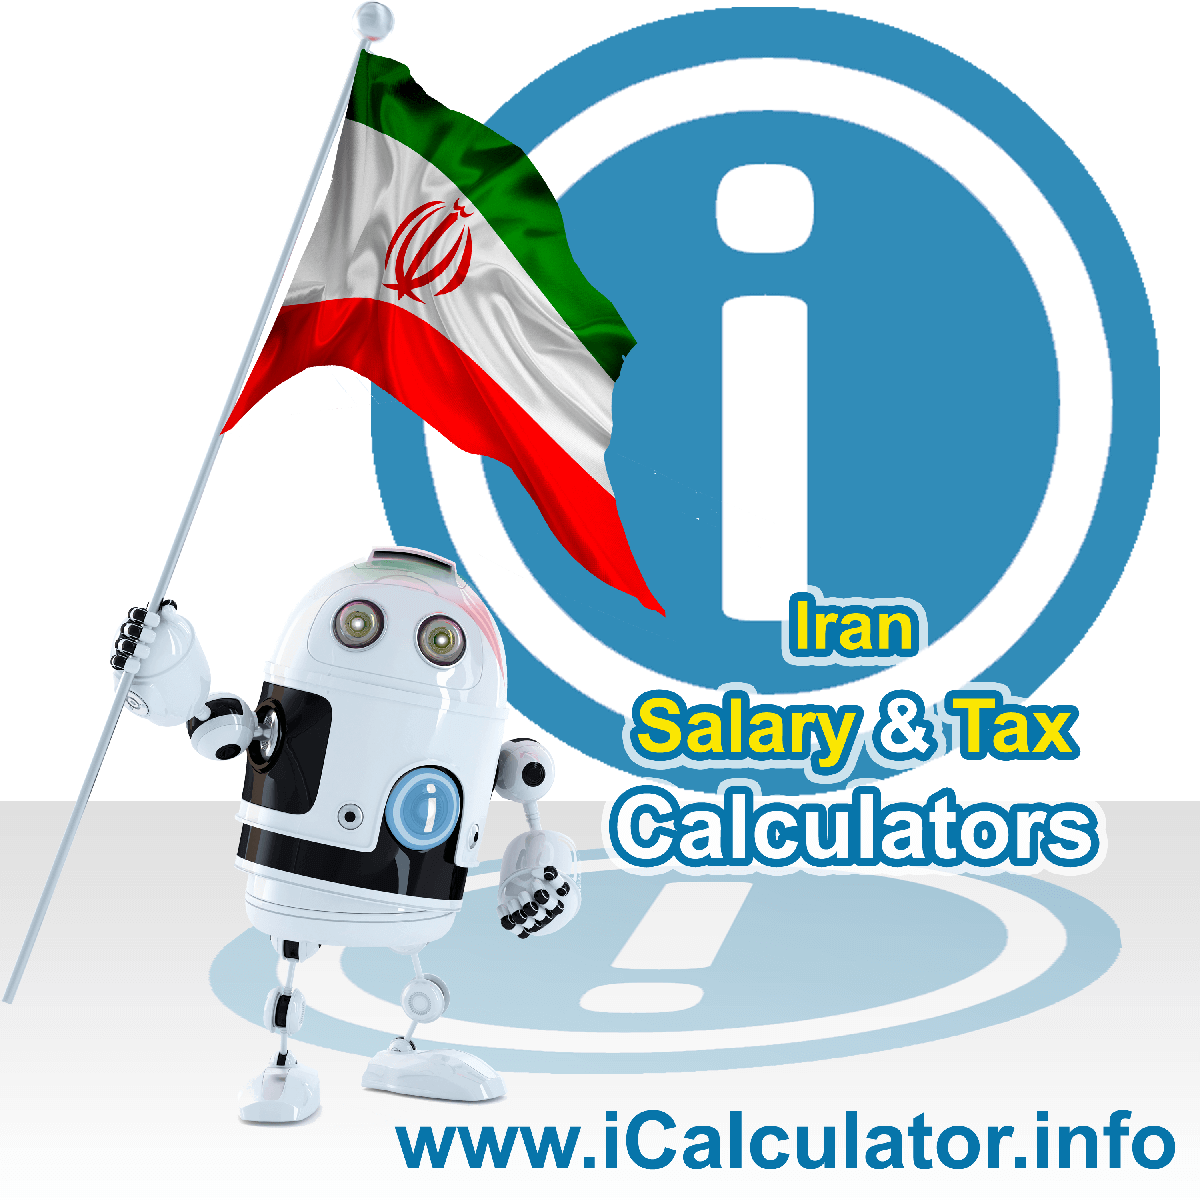 Iran Salary Calculator. This image shows the Iranese flag and information relating to the tax formula for the Iran Tax Calculator